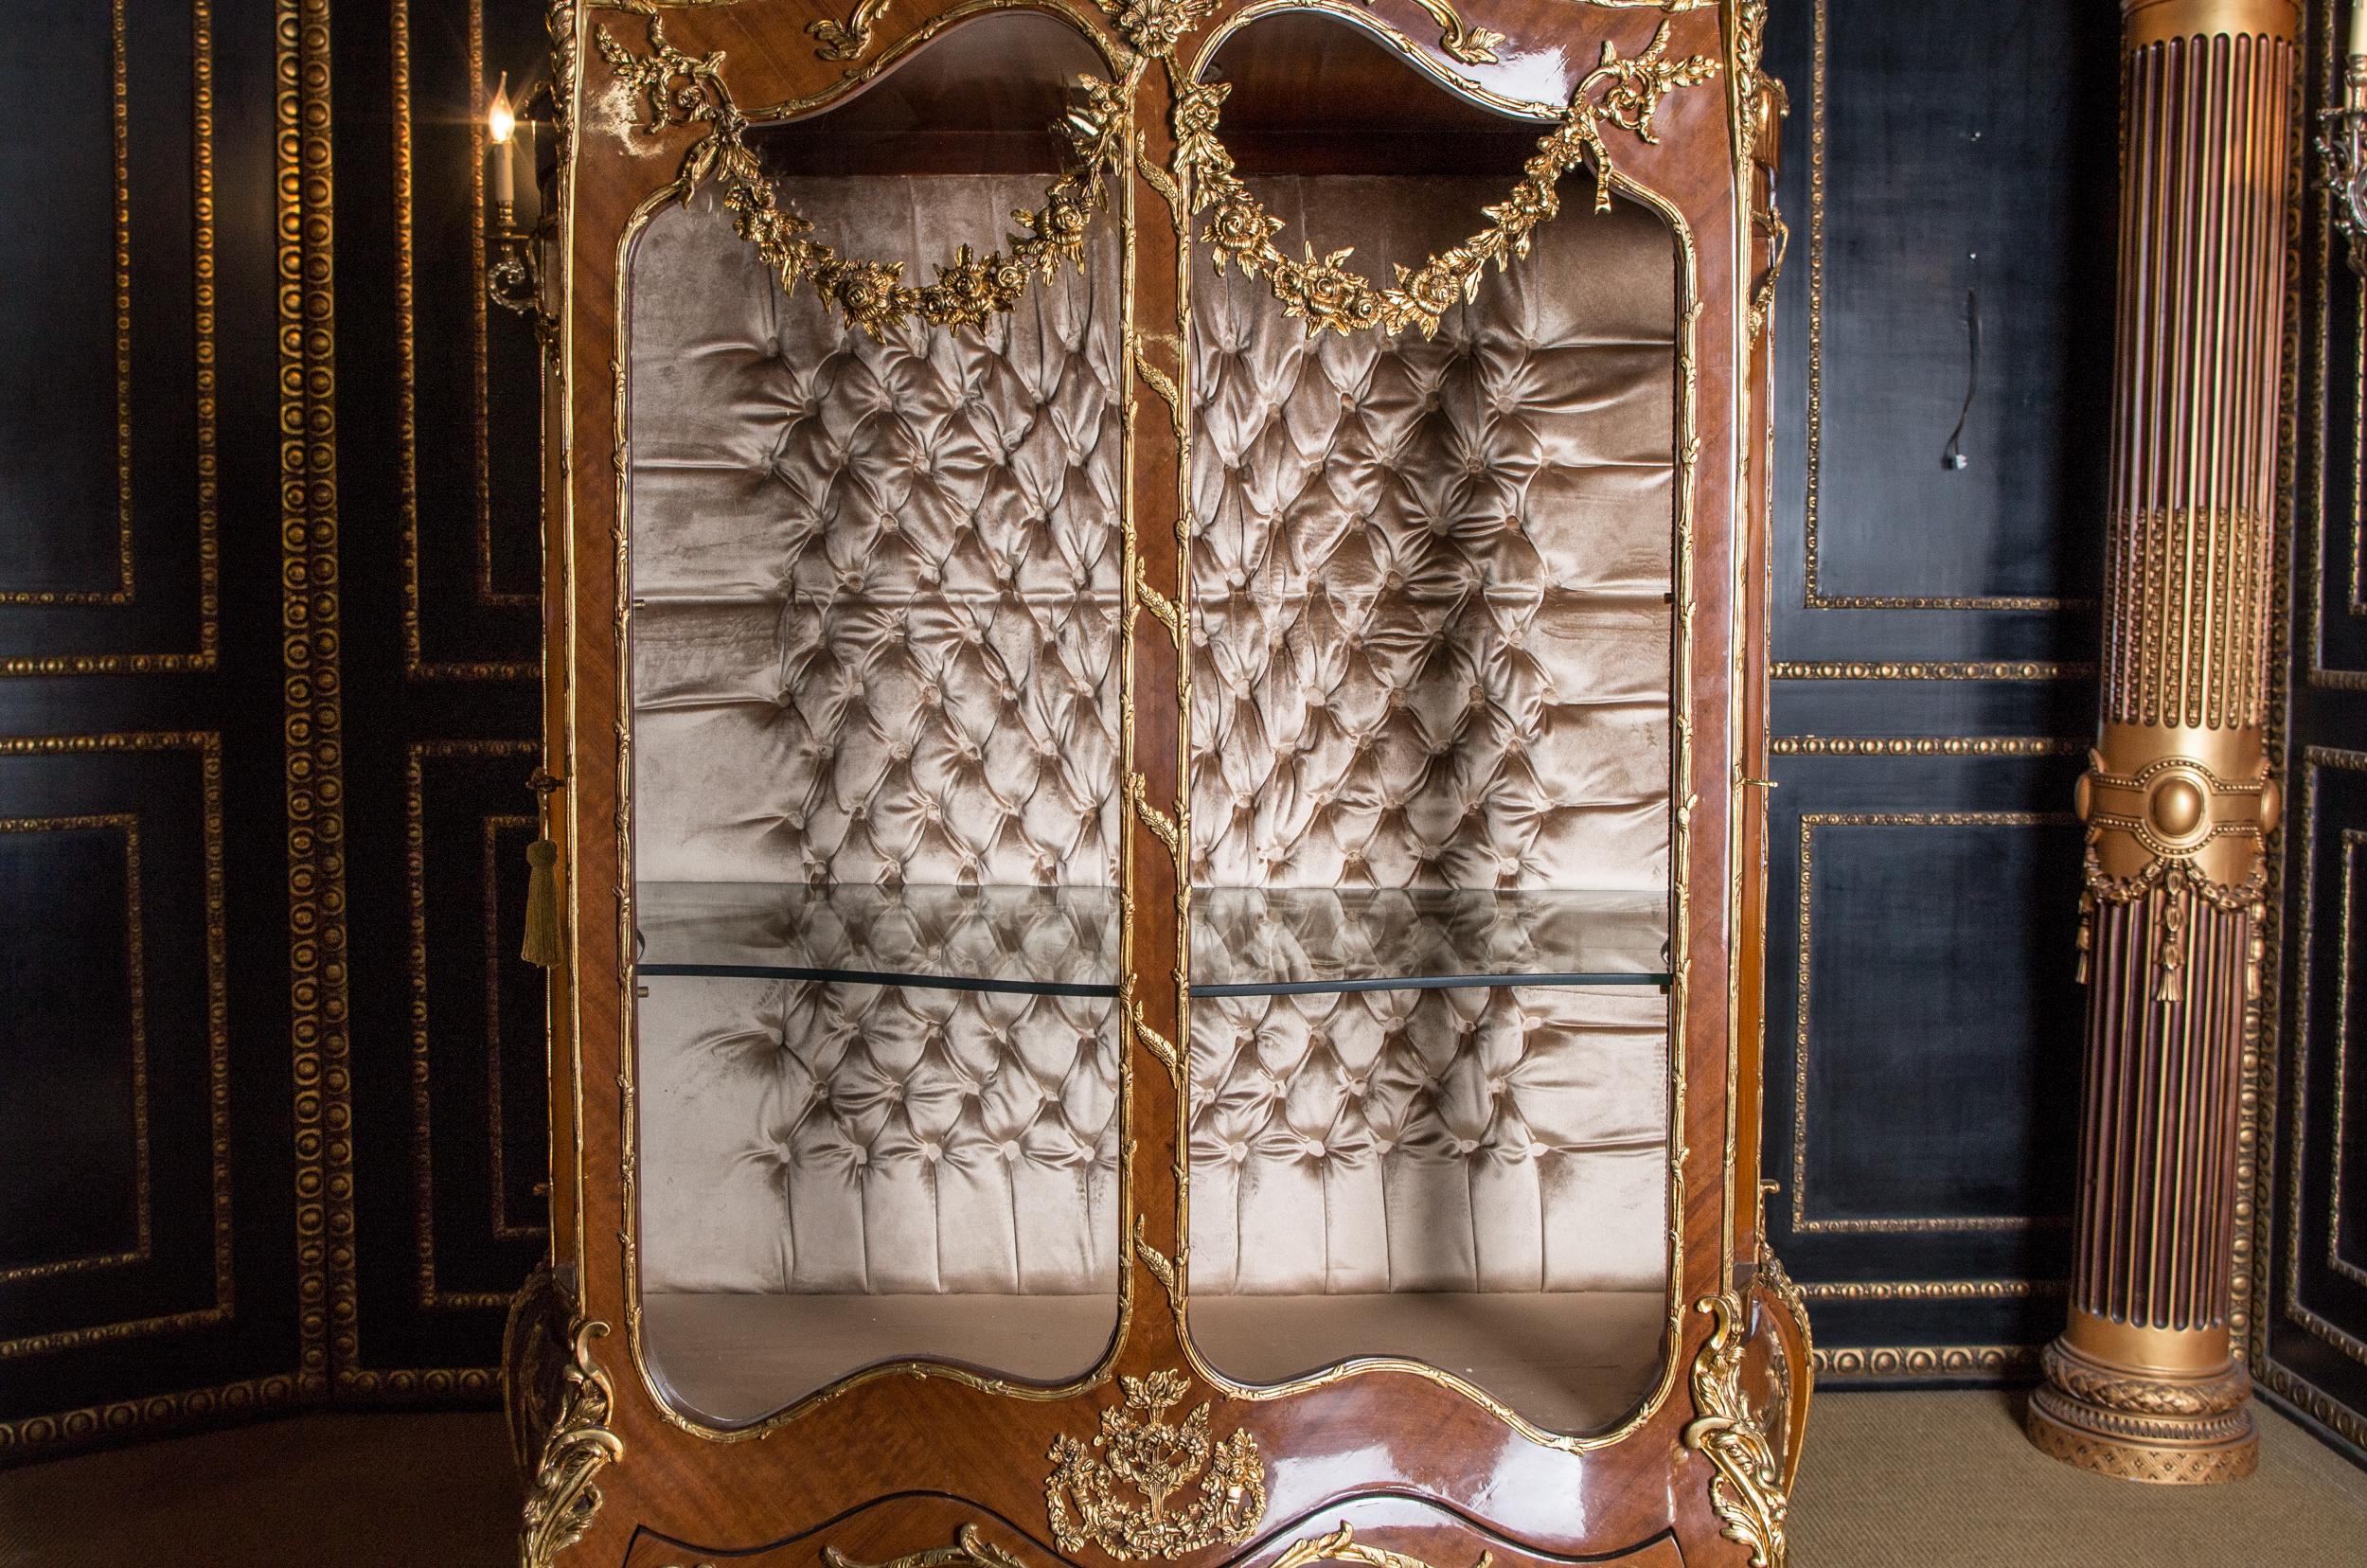 Majestic French Display Case in the Style of the 18th Century, Louis Quinze (Französisch)